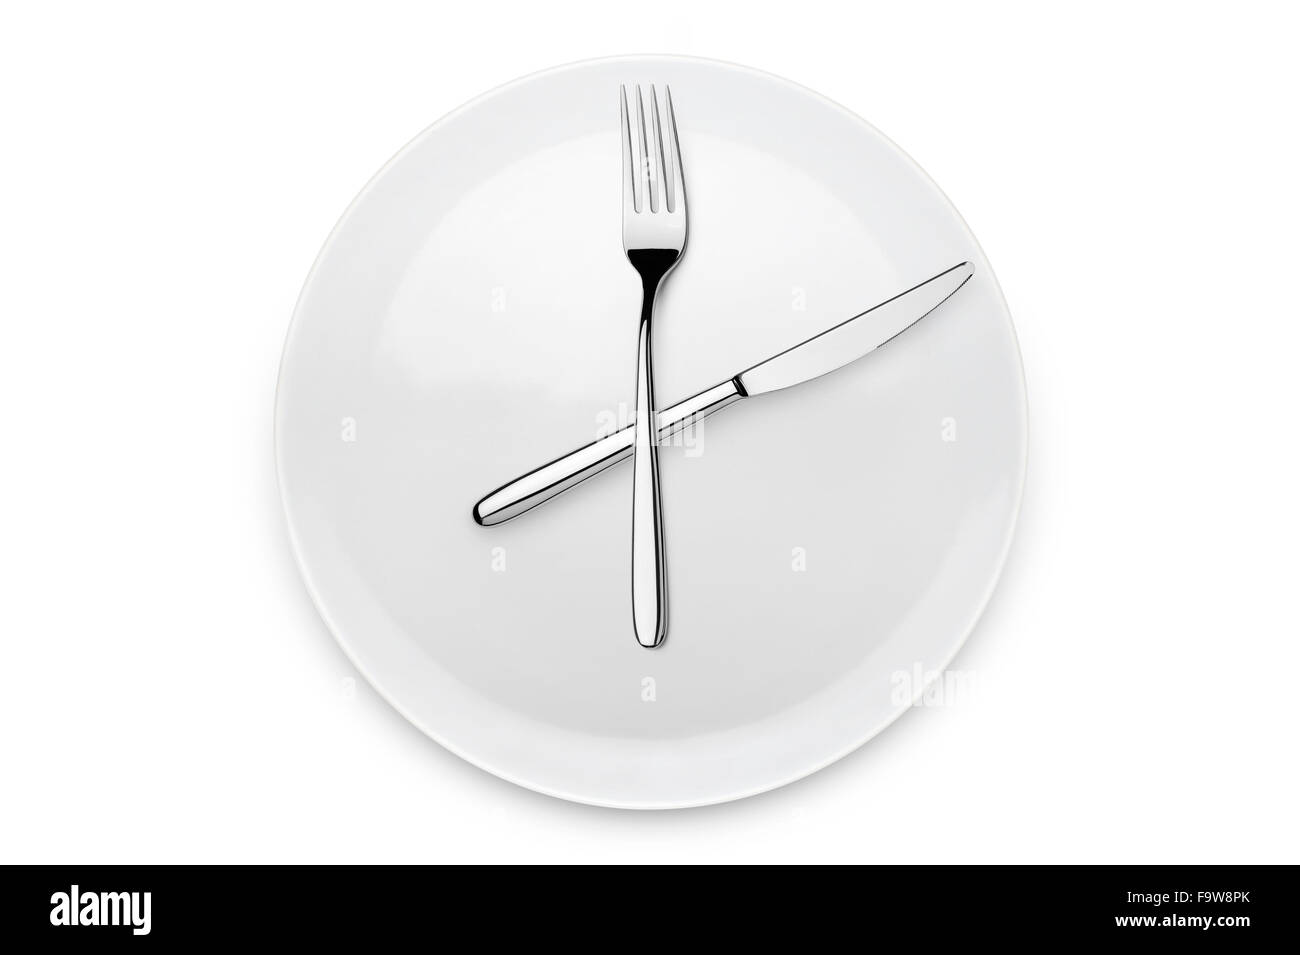 plate with fork and knife at twelve o'clock position, on white background Stock Photo